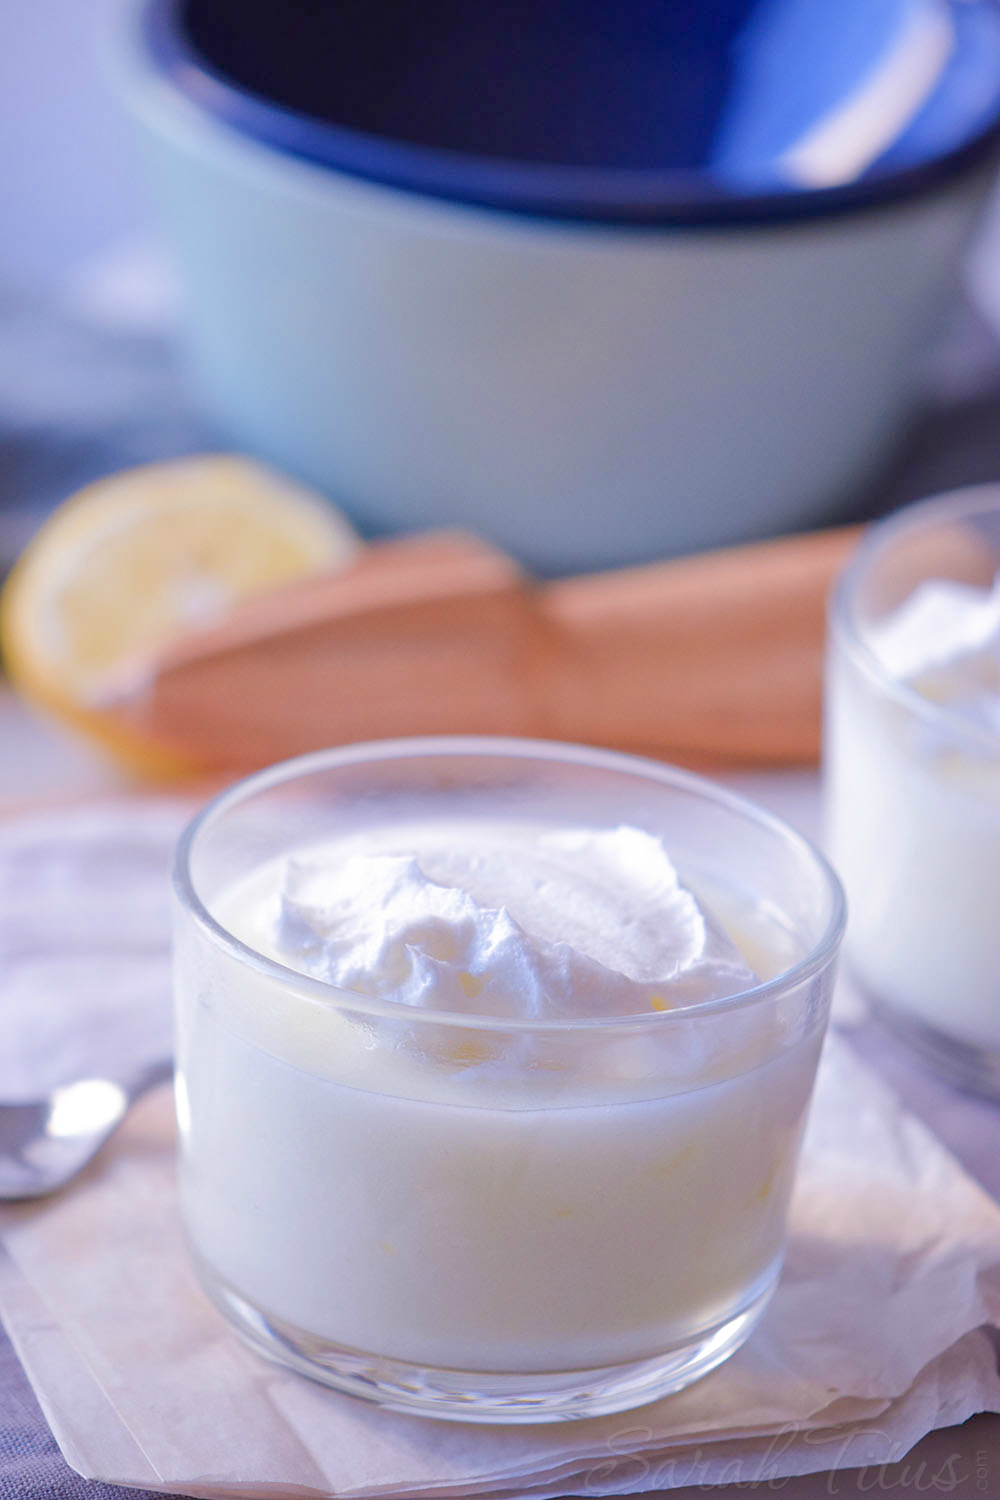 If you're in the mood for something sweet, light, and airy, this lemon zest pudding is PERFECT for you!